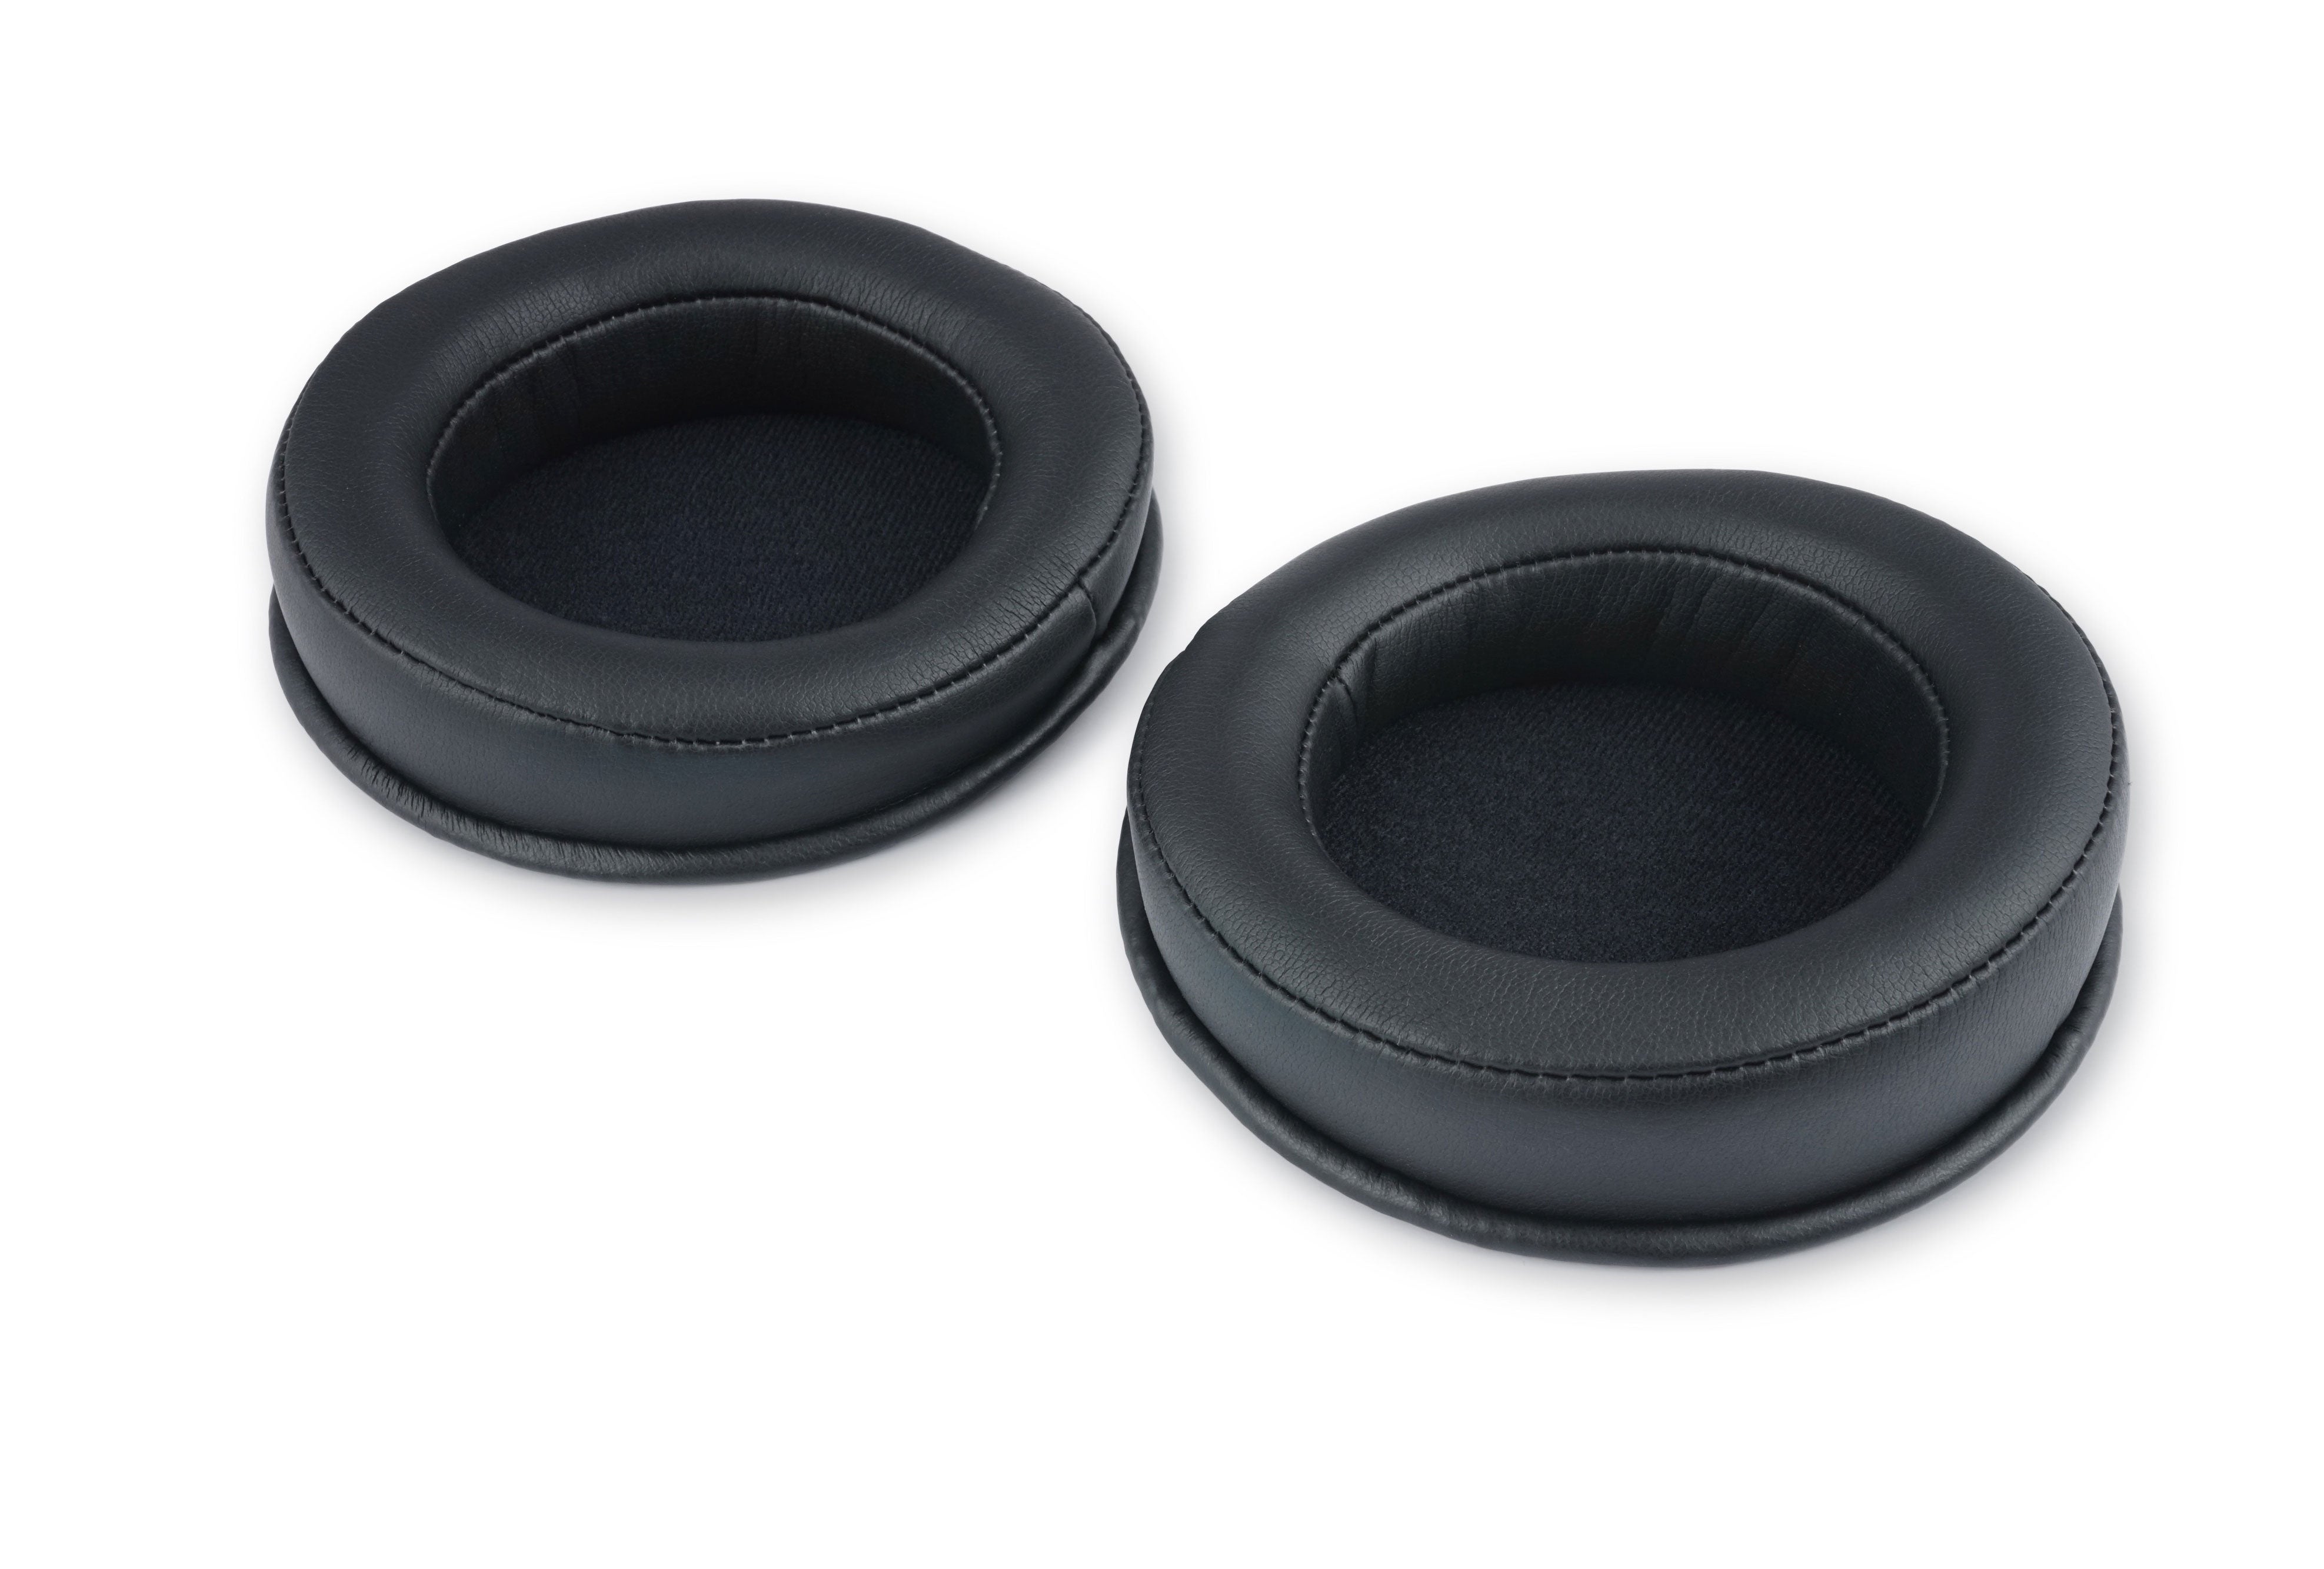 Fostex EX-EP-91 - Replacement Ear Pads for TH-900mk2